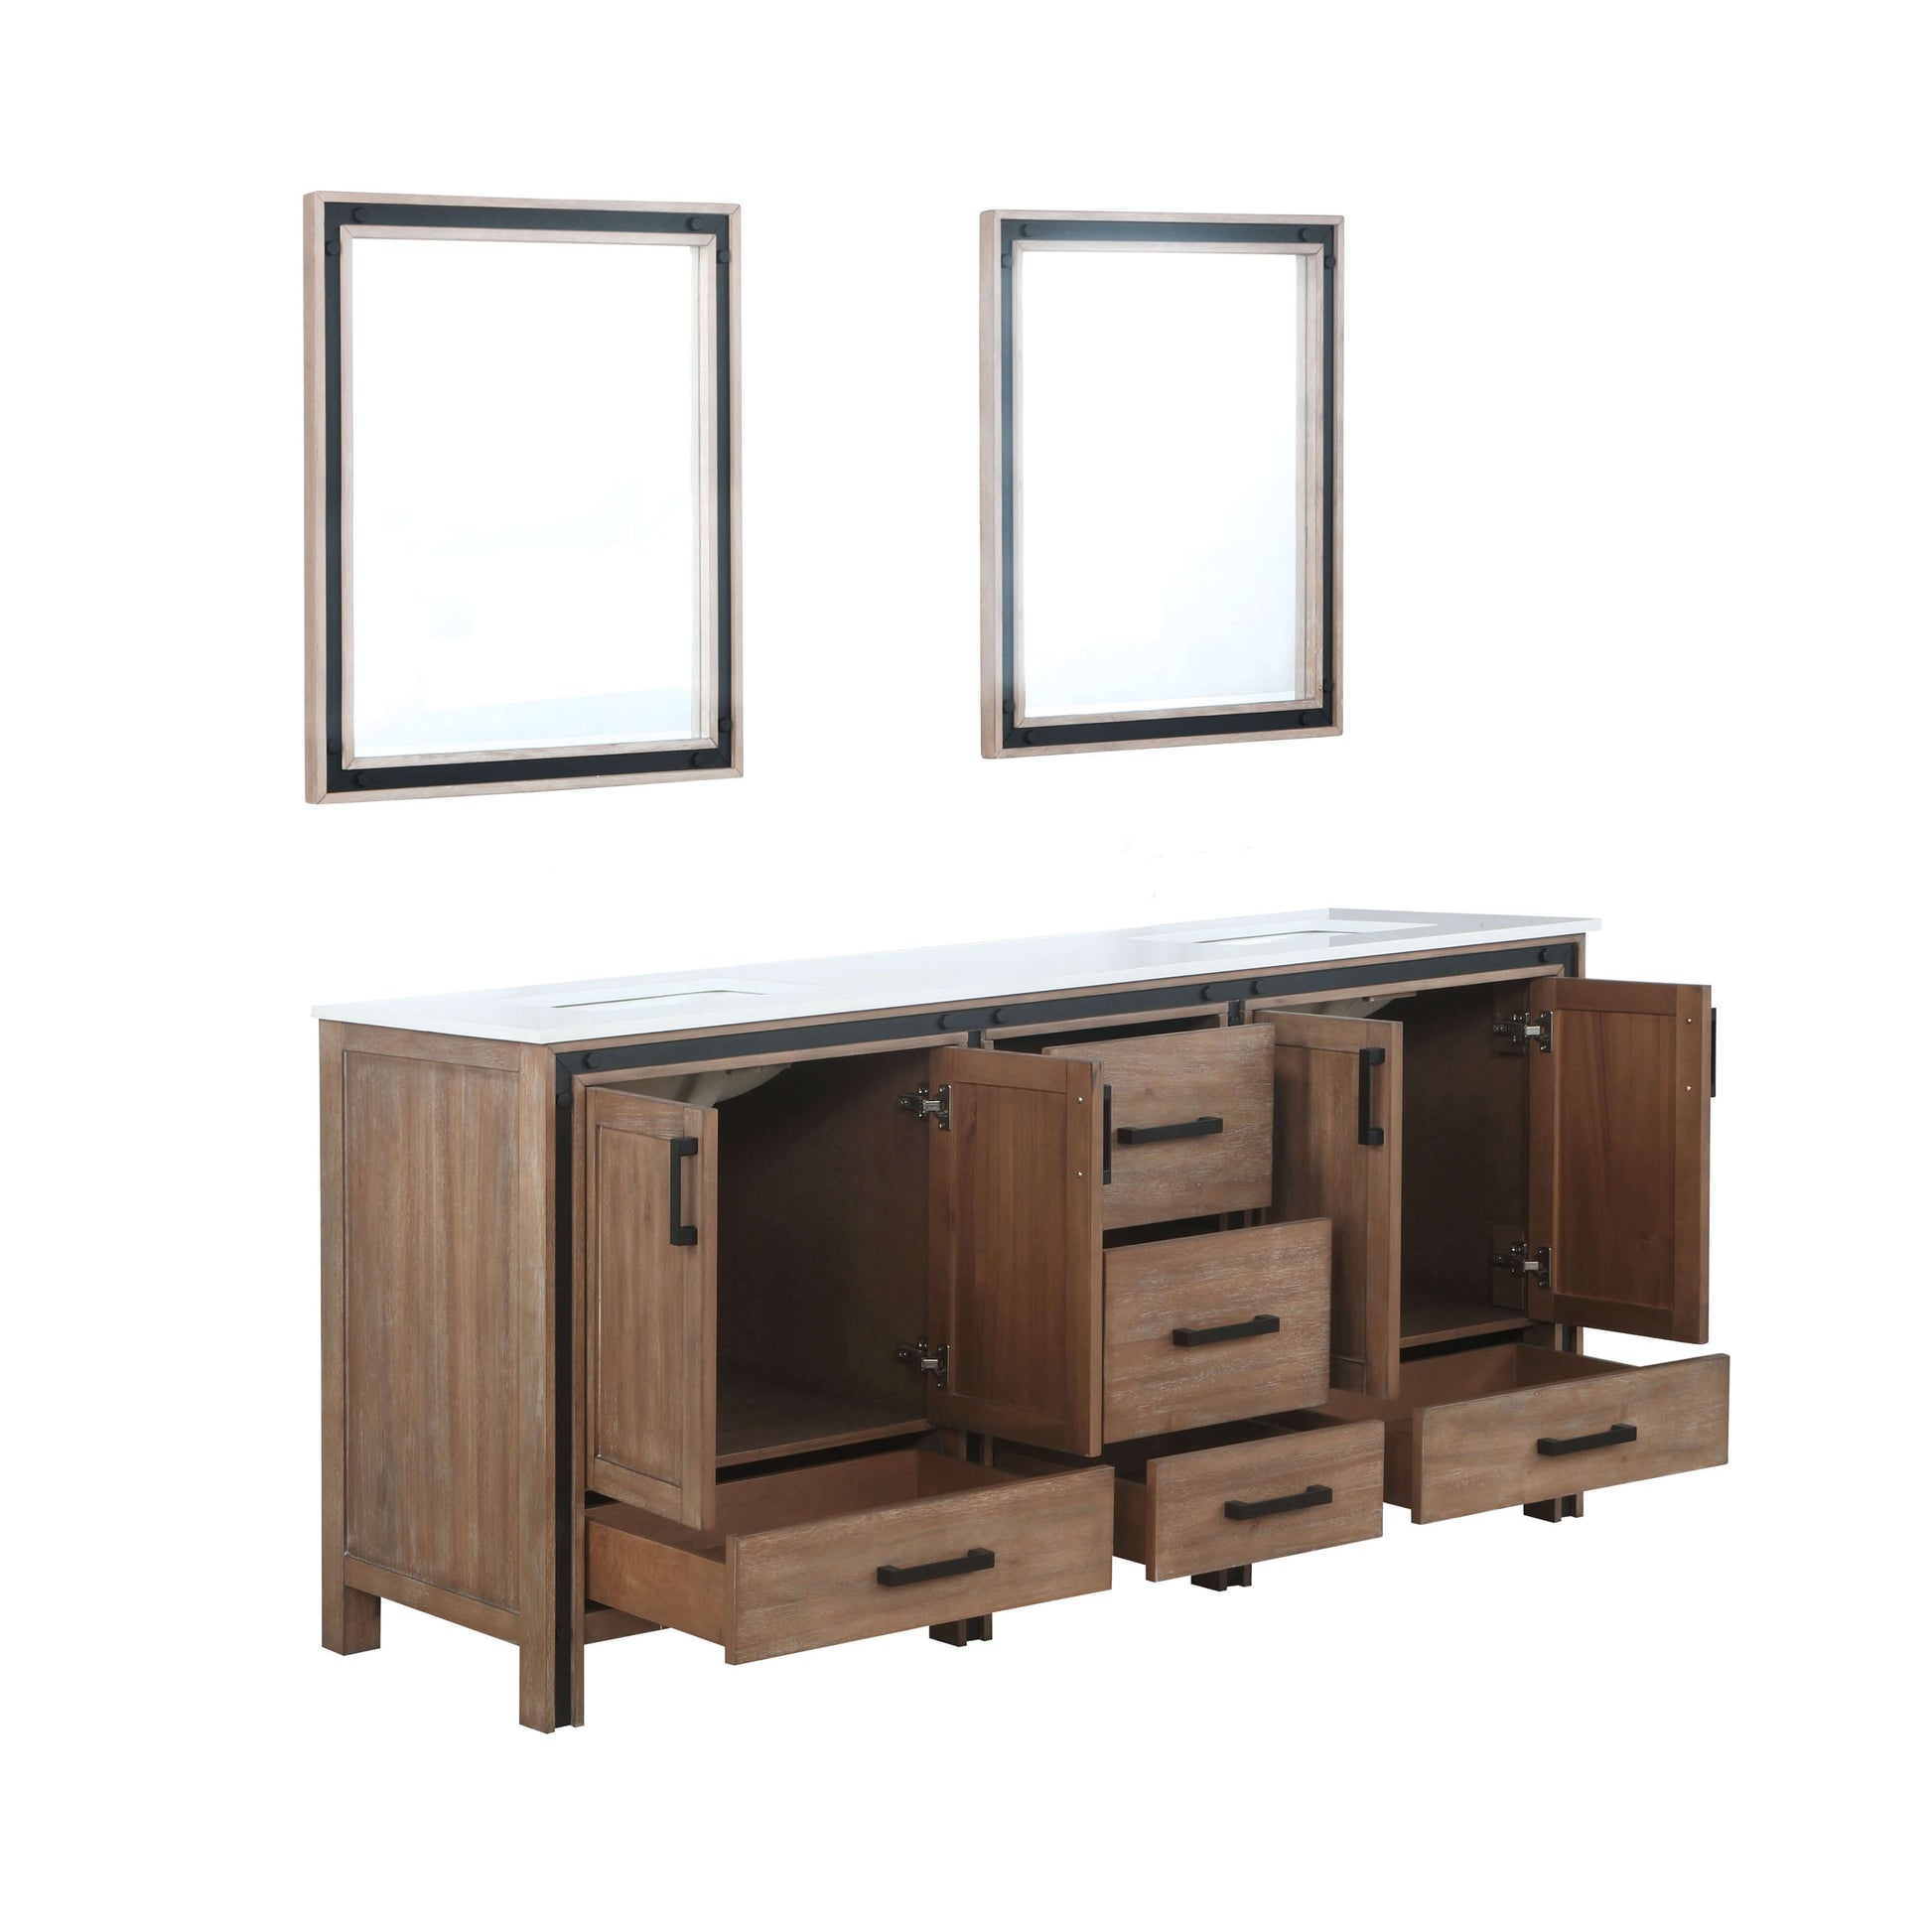 Ziva 72" Rustic Barnwood Double Vanity, Cultured Marble Top, White Square Sink and 30" Mirrors - LZV352272SNJSM30